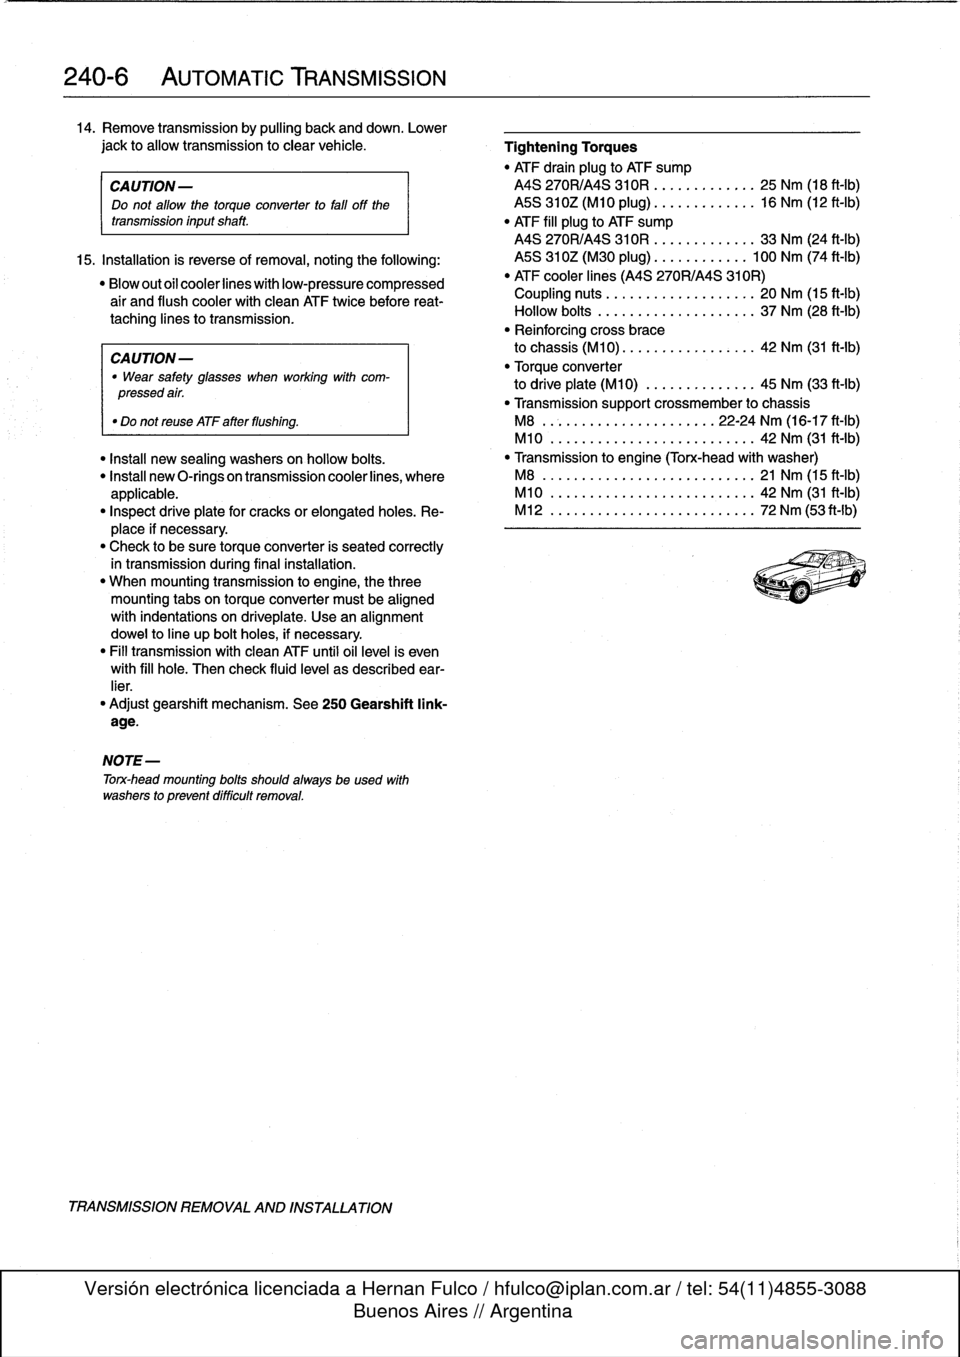 BMW 318i 1995 E36 User Guide 
240-
6

	

AUTOMATIC
TRANSMISSION

14
.
Remove
transmission
by
pulling
back
and
down
.
Lower

jack
to
allow
transmission
to
clear
vehicle
.

	

Tightening
Torques

"
ATF
drain
plug
to
ATF
sump

CA
UT